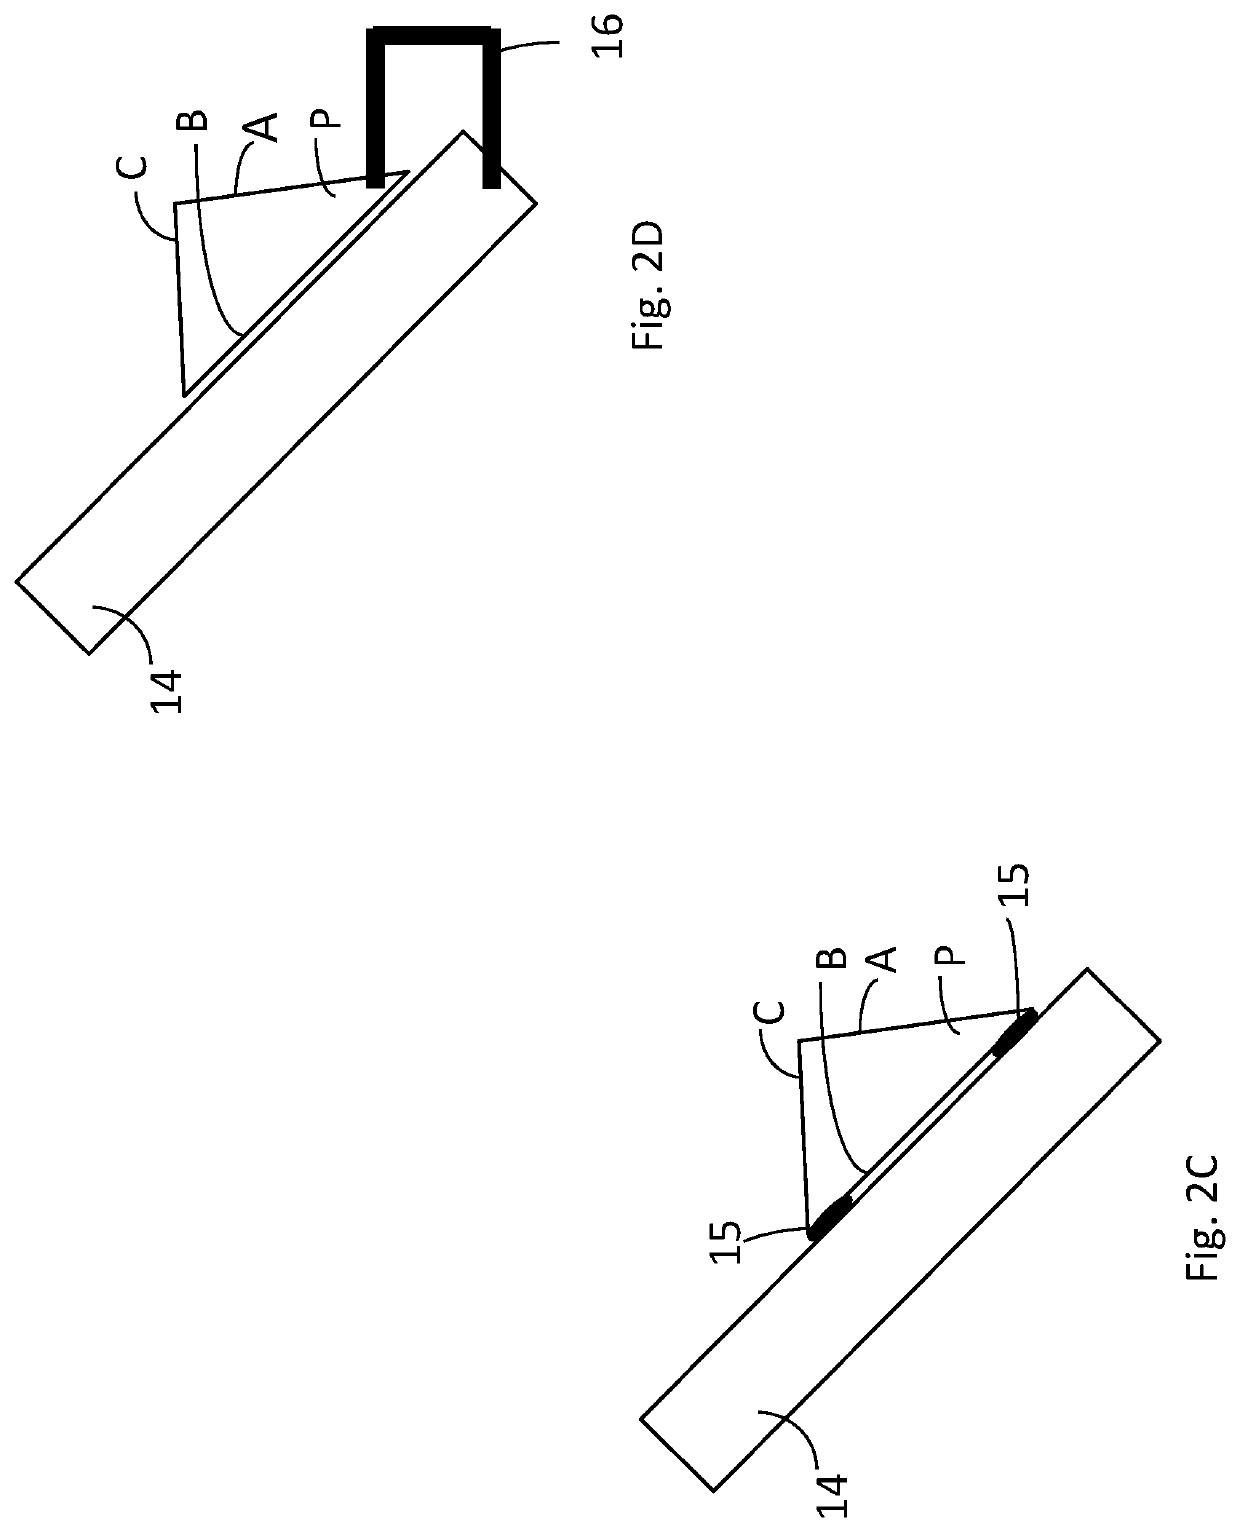 Miniature imaging system for ophthalmic laser beam delivery system